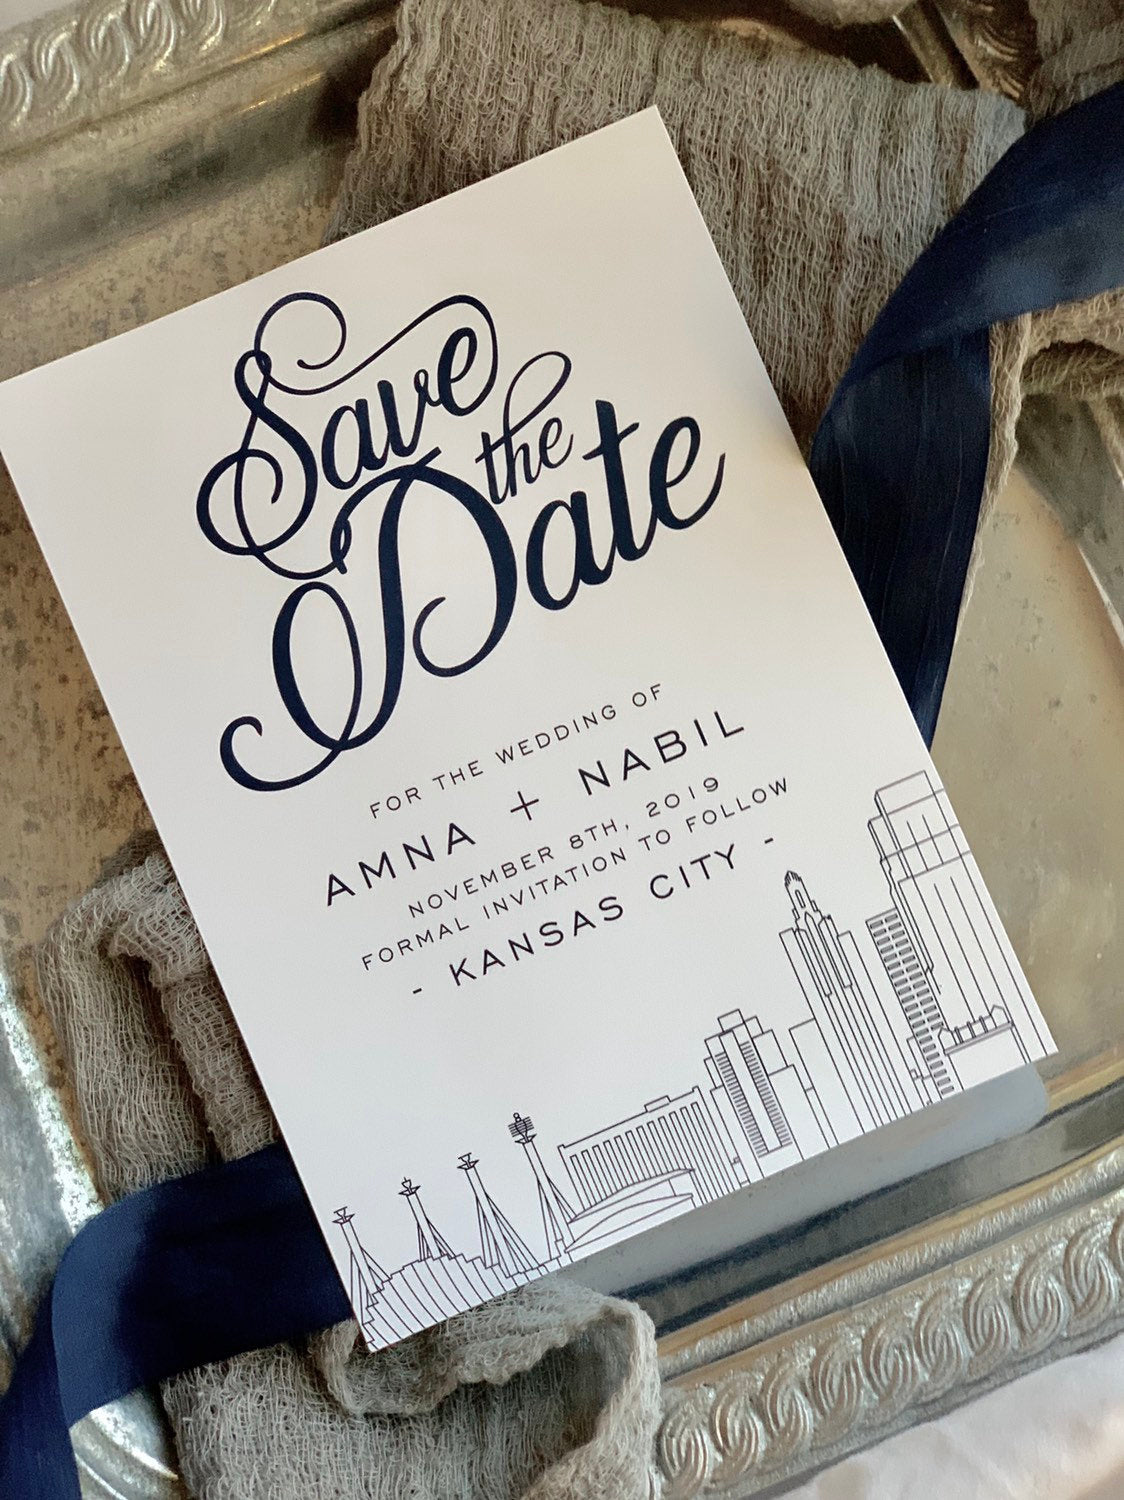 Save the Date - Wedding Save the Date Engagement Invitation Wedding Papers Style 183